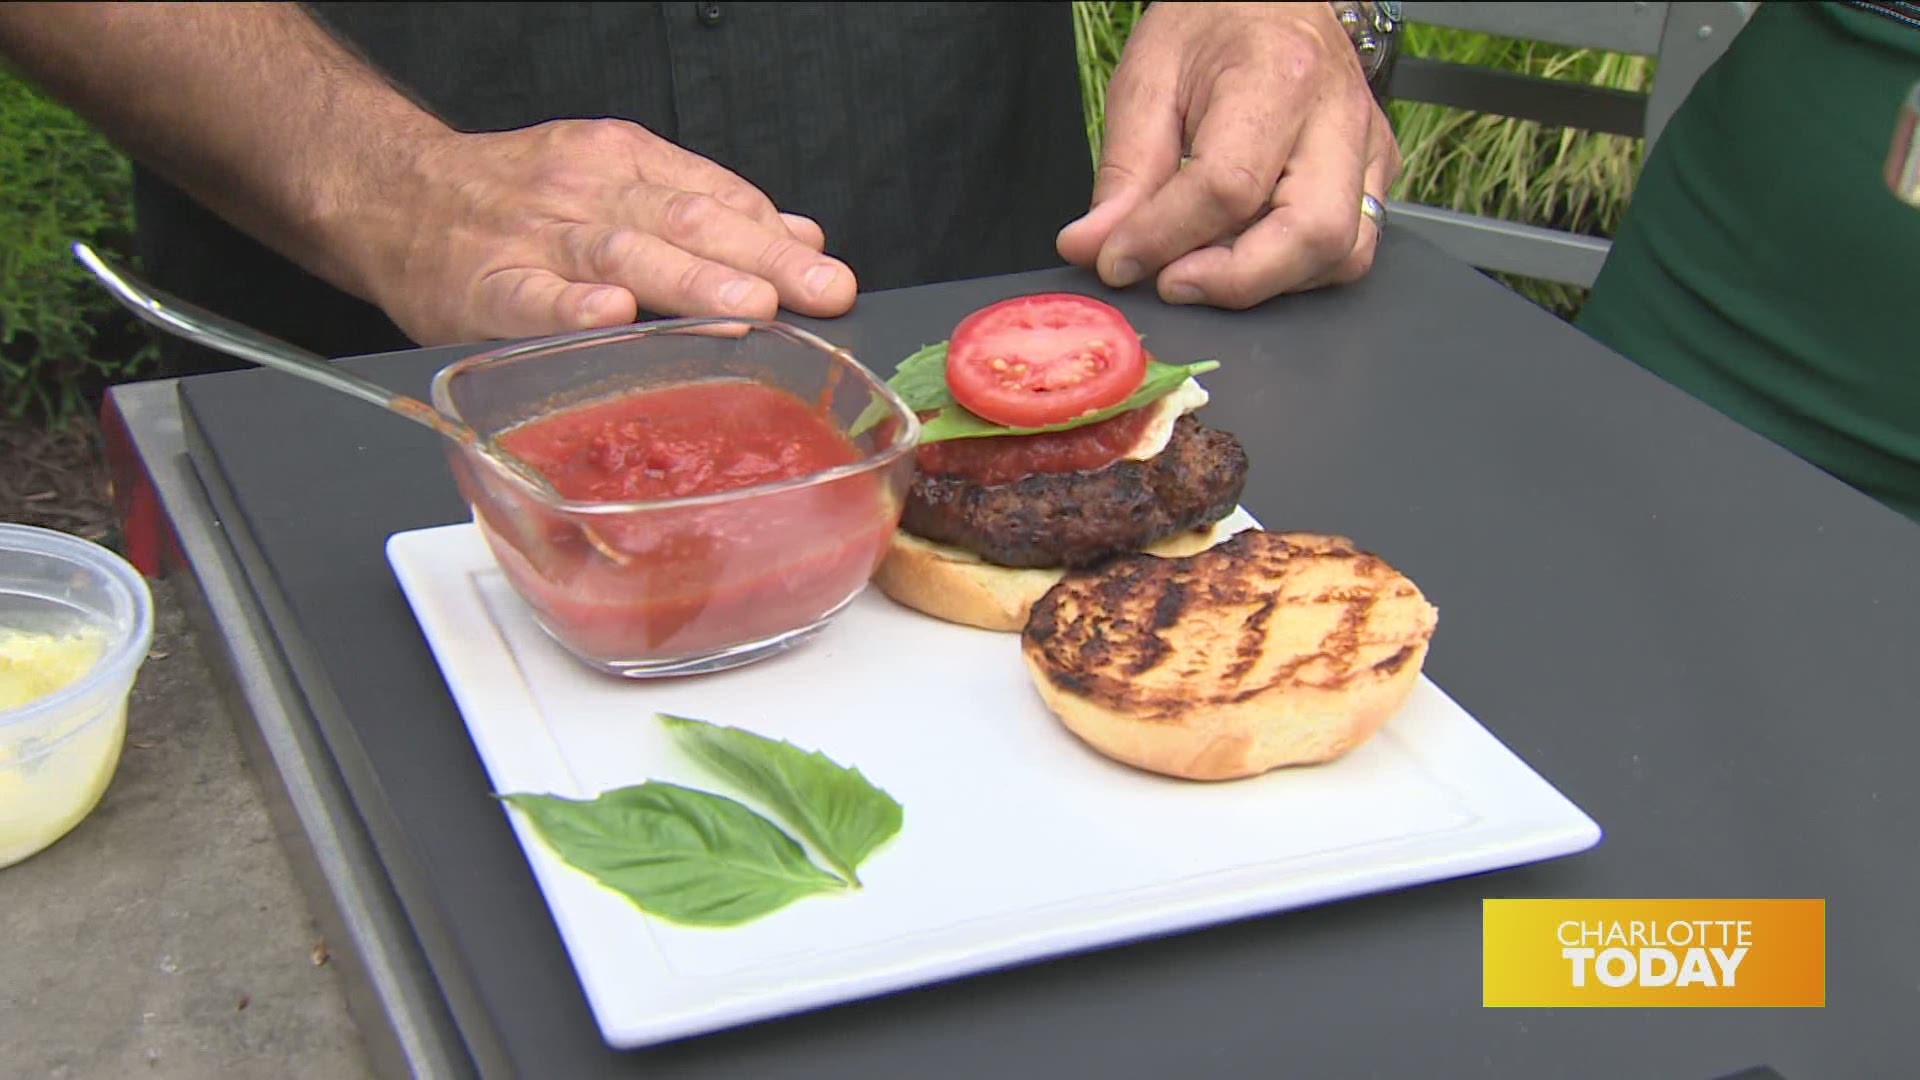 Discover the special sauce used in these tasty burgers